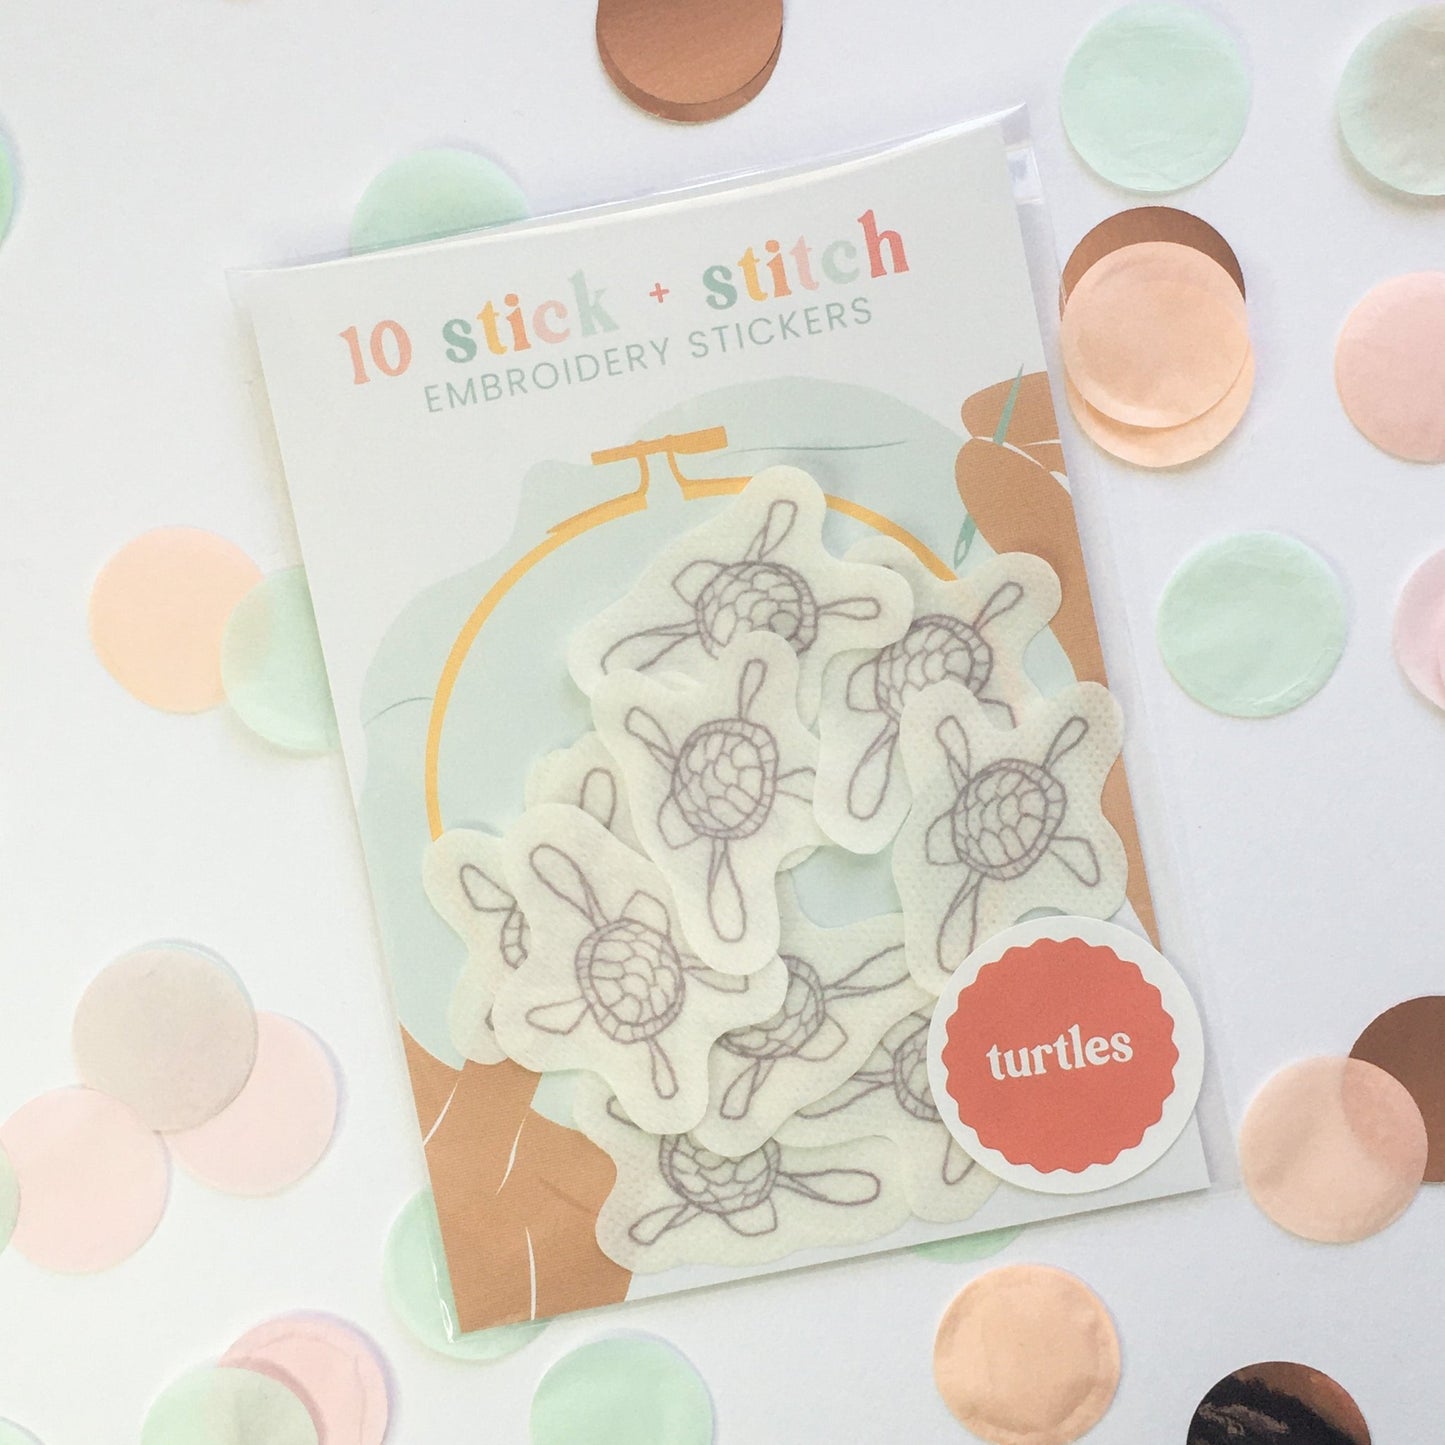 Turtles Stick and Stitch Embroidery Stickers - Craft Make Do